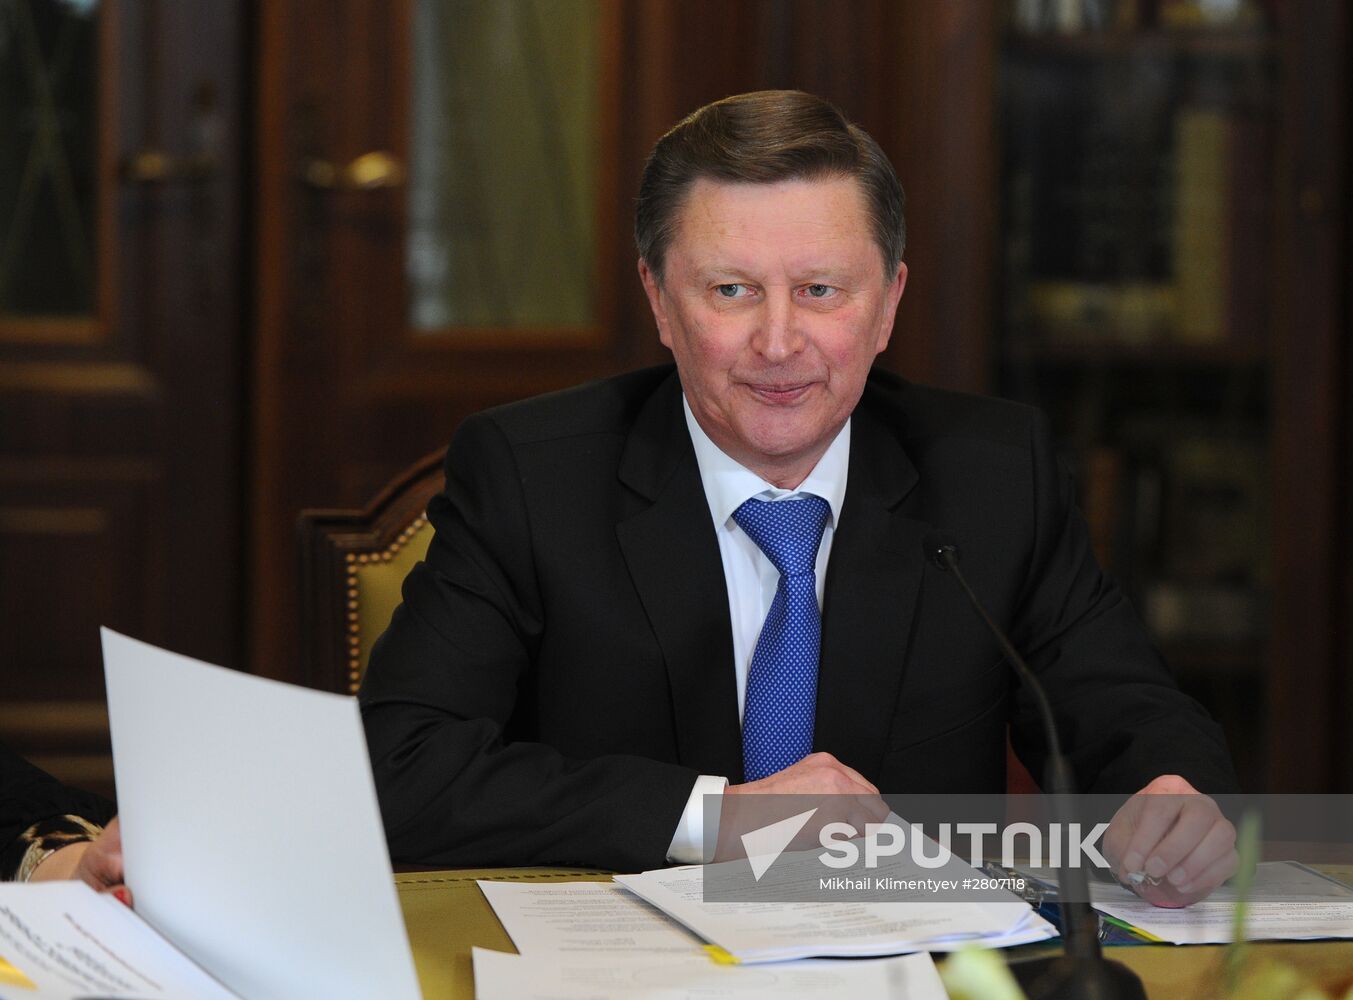 Chief of Staff of the Russian Presidential Executive Office Sergei Ivanov chairs meeting of Far Eastern Leopards Supervisory Board